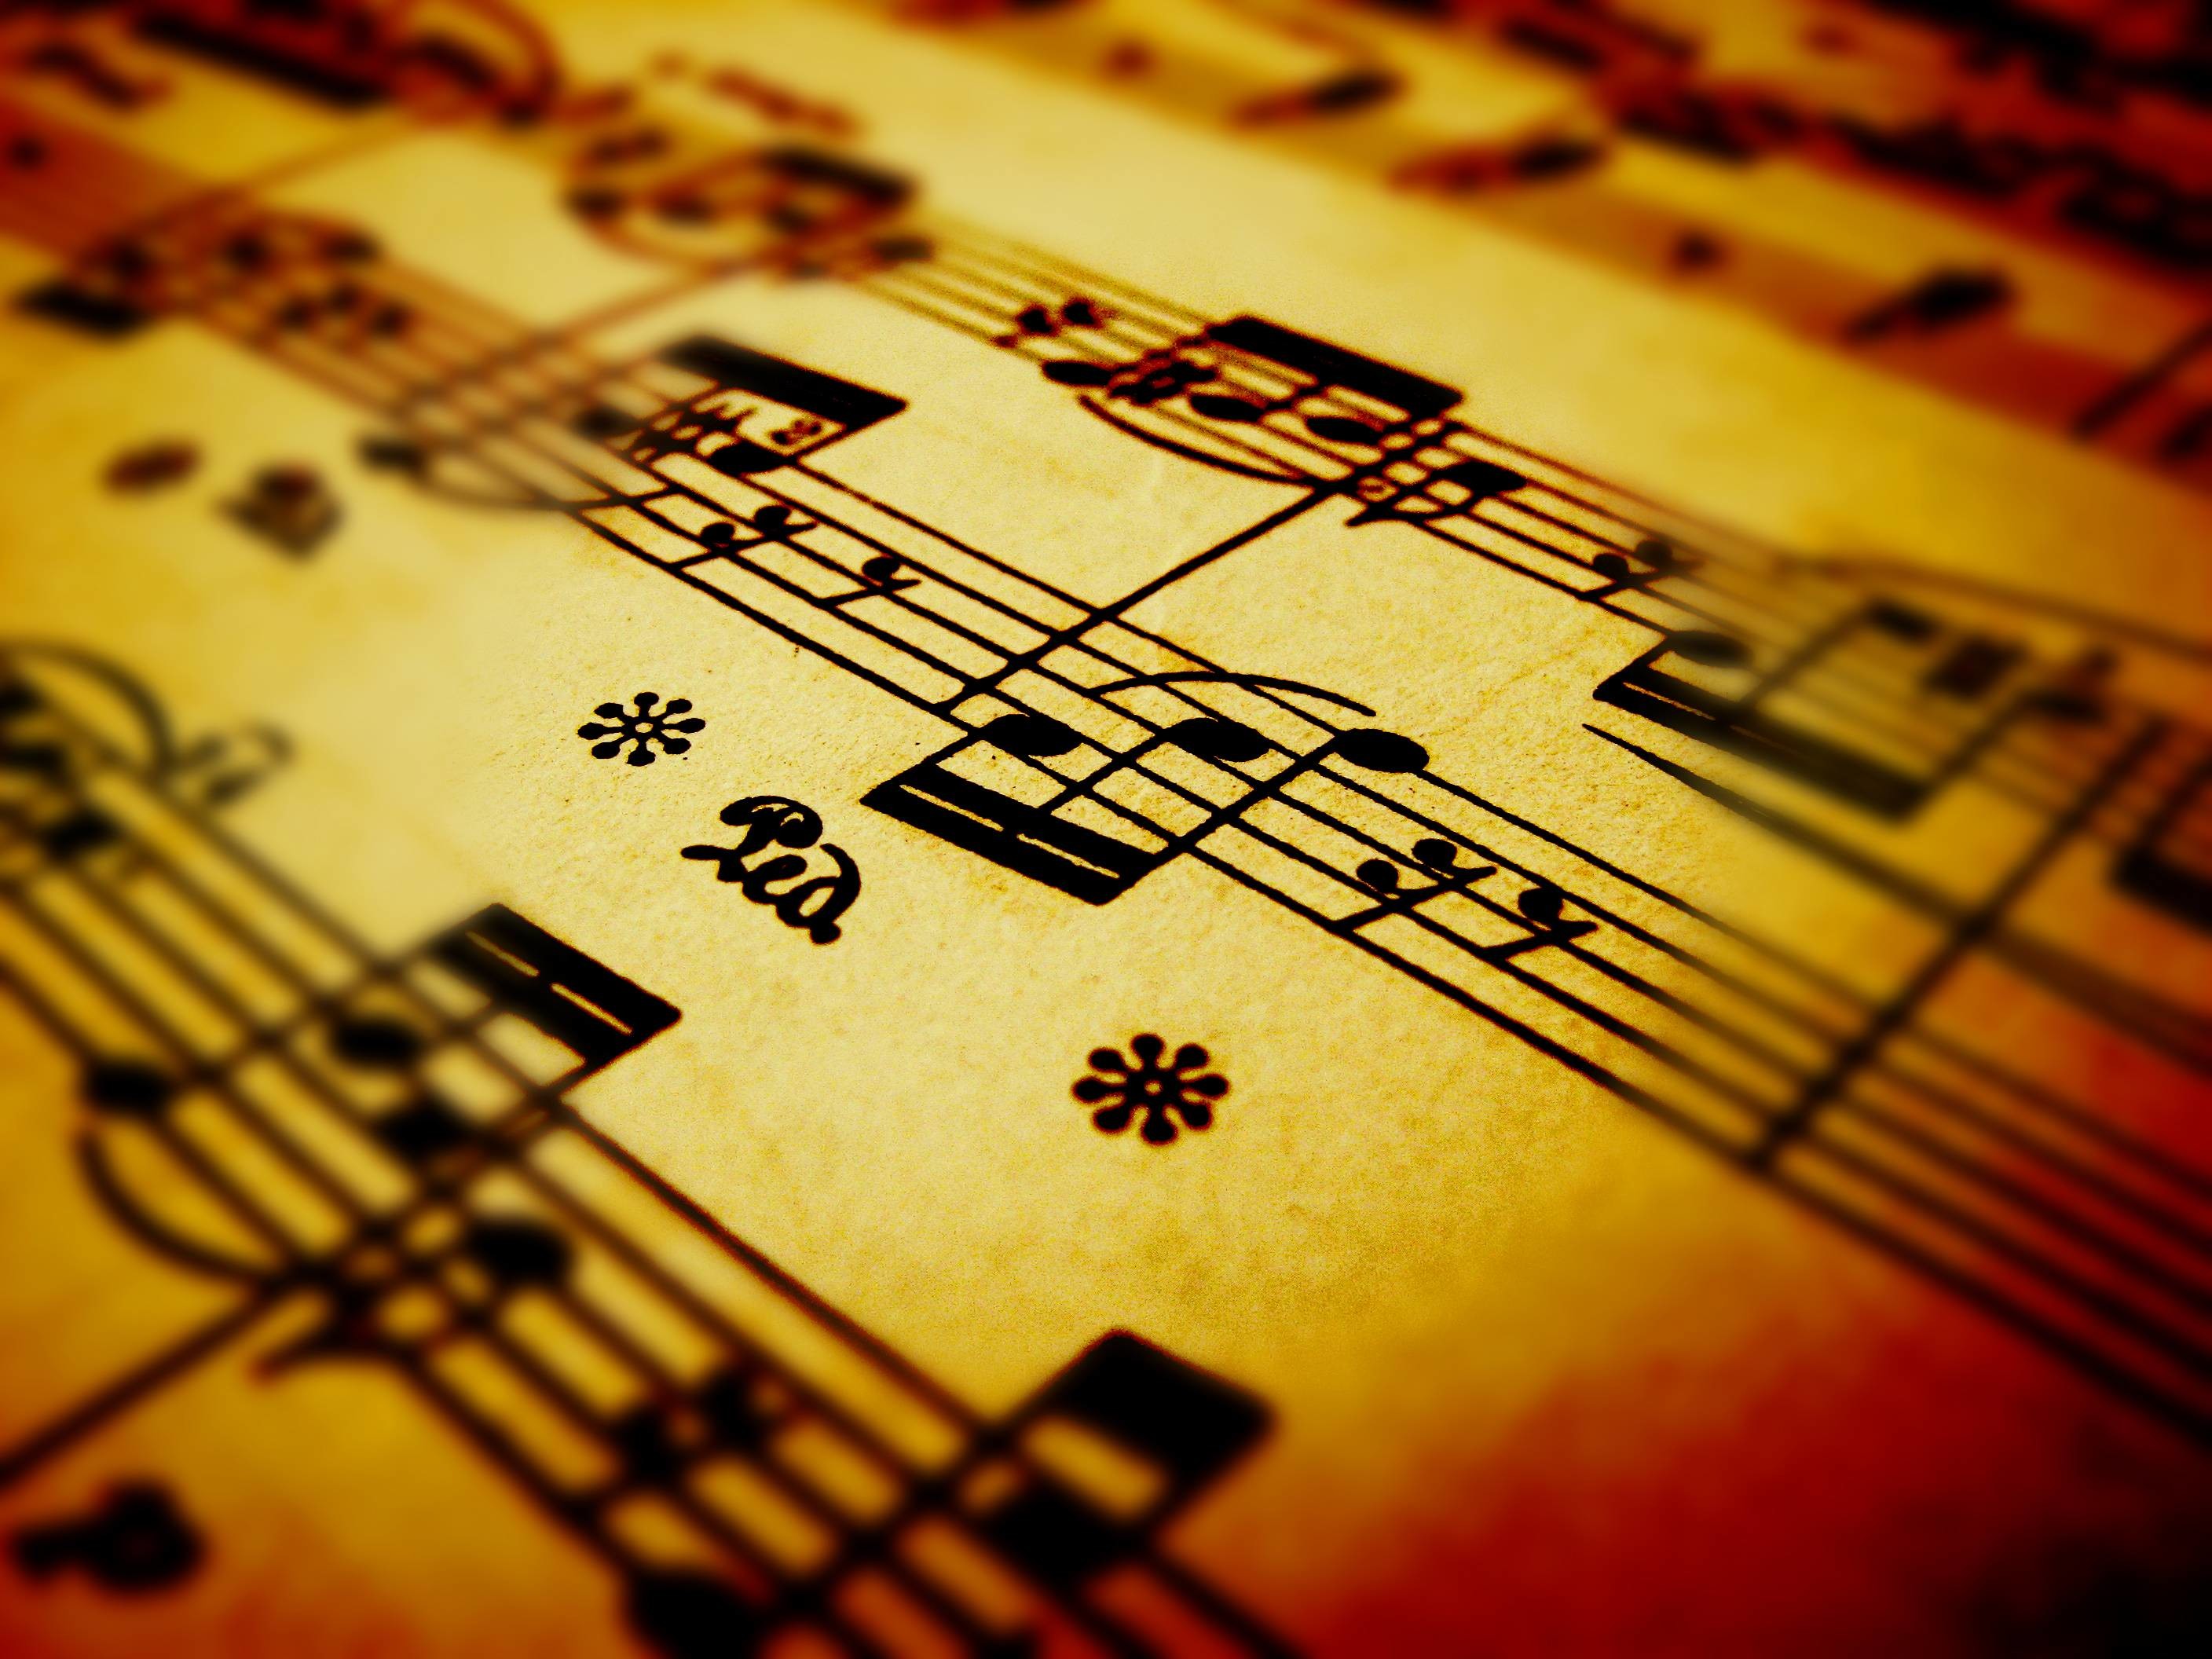 2816x2112 Wallpapers Classical Music Widescreen 2 HD Wallpapers | aladdino.